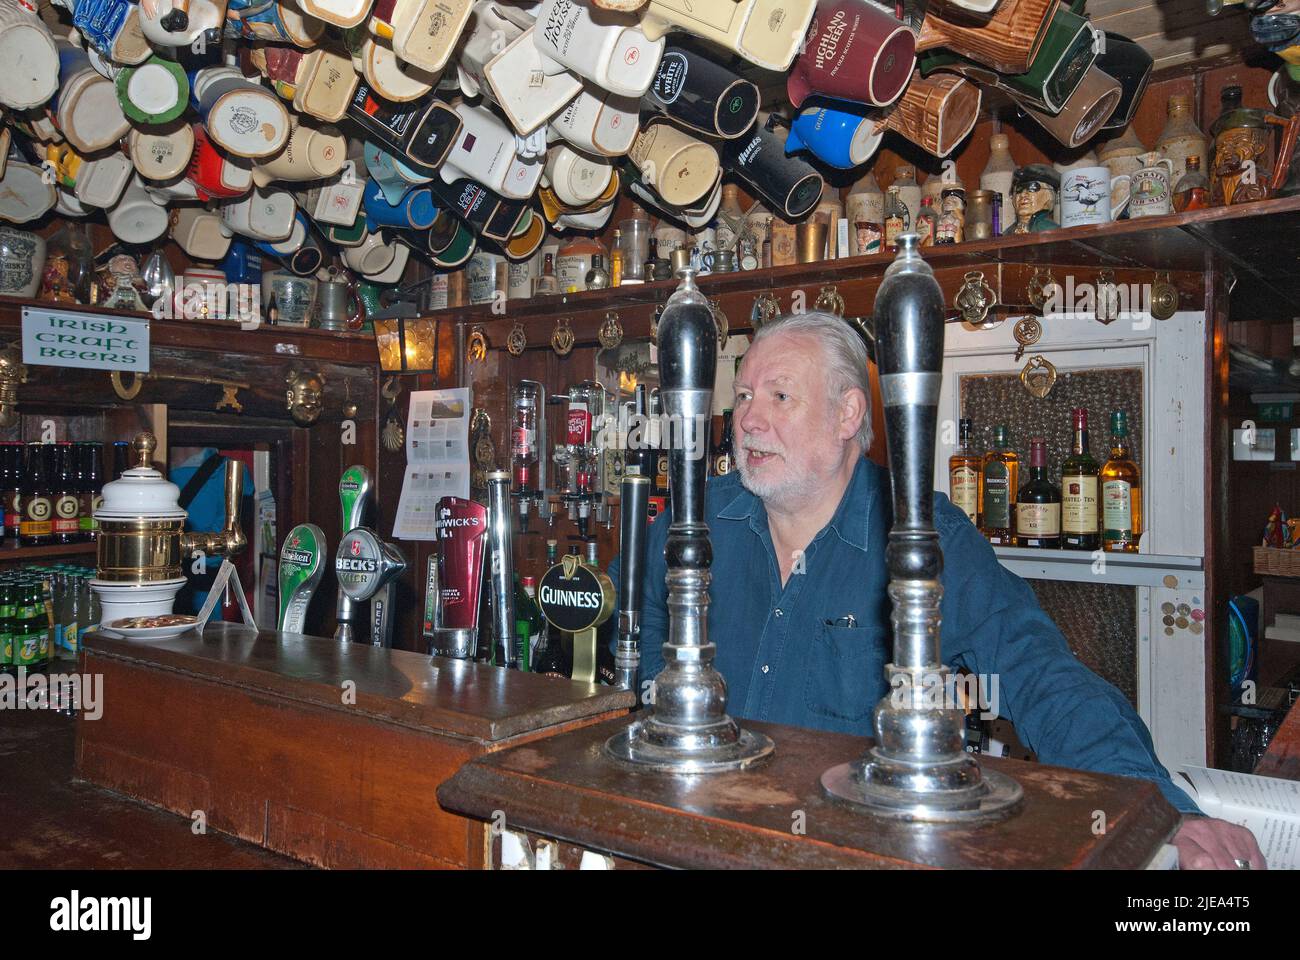 Landlord behind the counter at Nancy's Bar with cups and jugs hanging on the ceiling, Ardara, County Donegal, Ireland Stock Photo